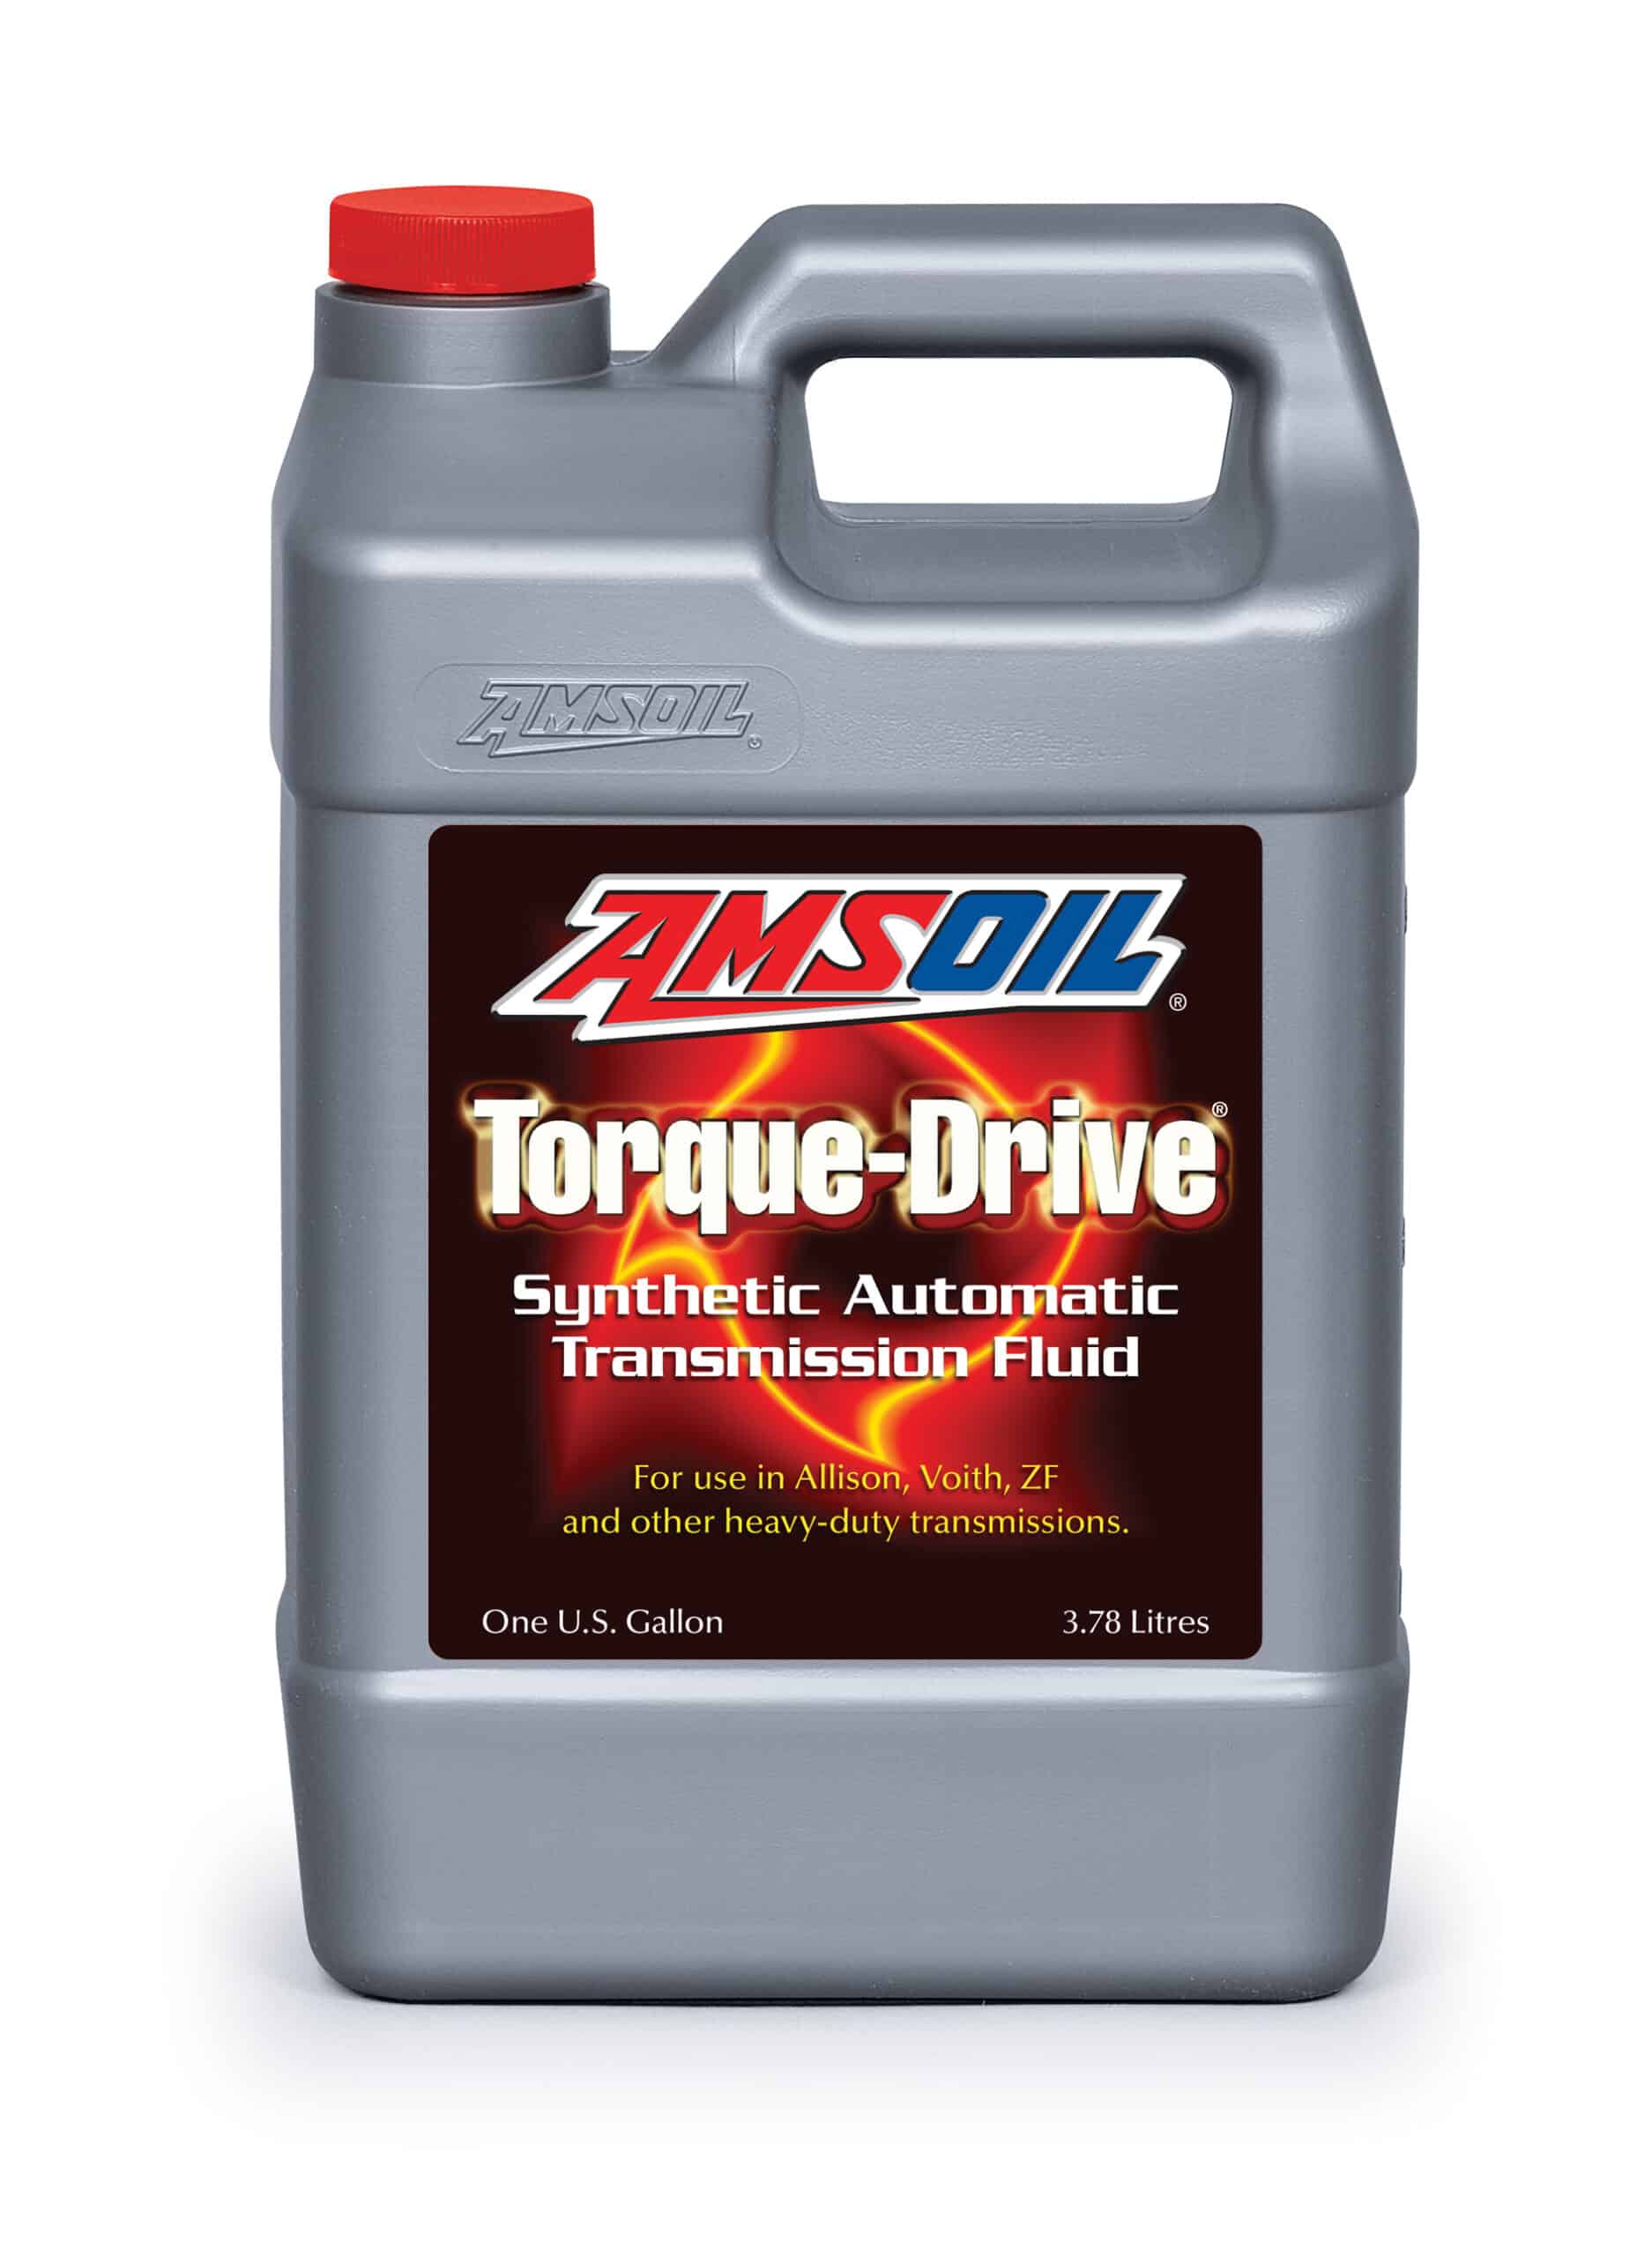 A gallon of AMSOIL Torque-Drive® Synthetic Automatic Transmission Fluid, formulated to provide superior performance and protection against thermal and oxidative degradation.